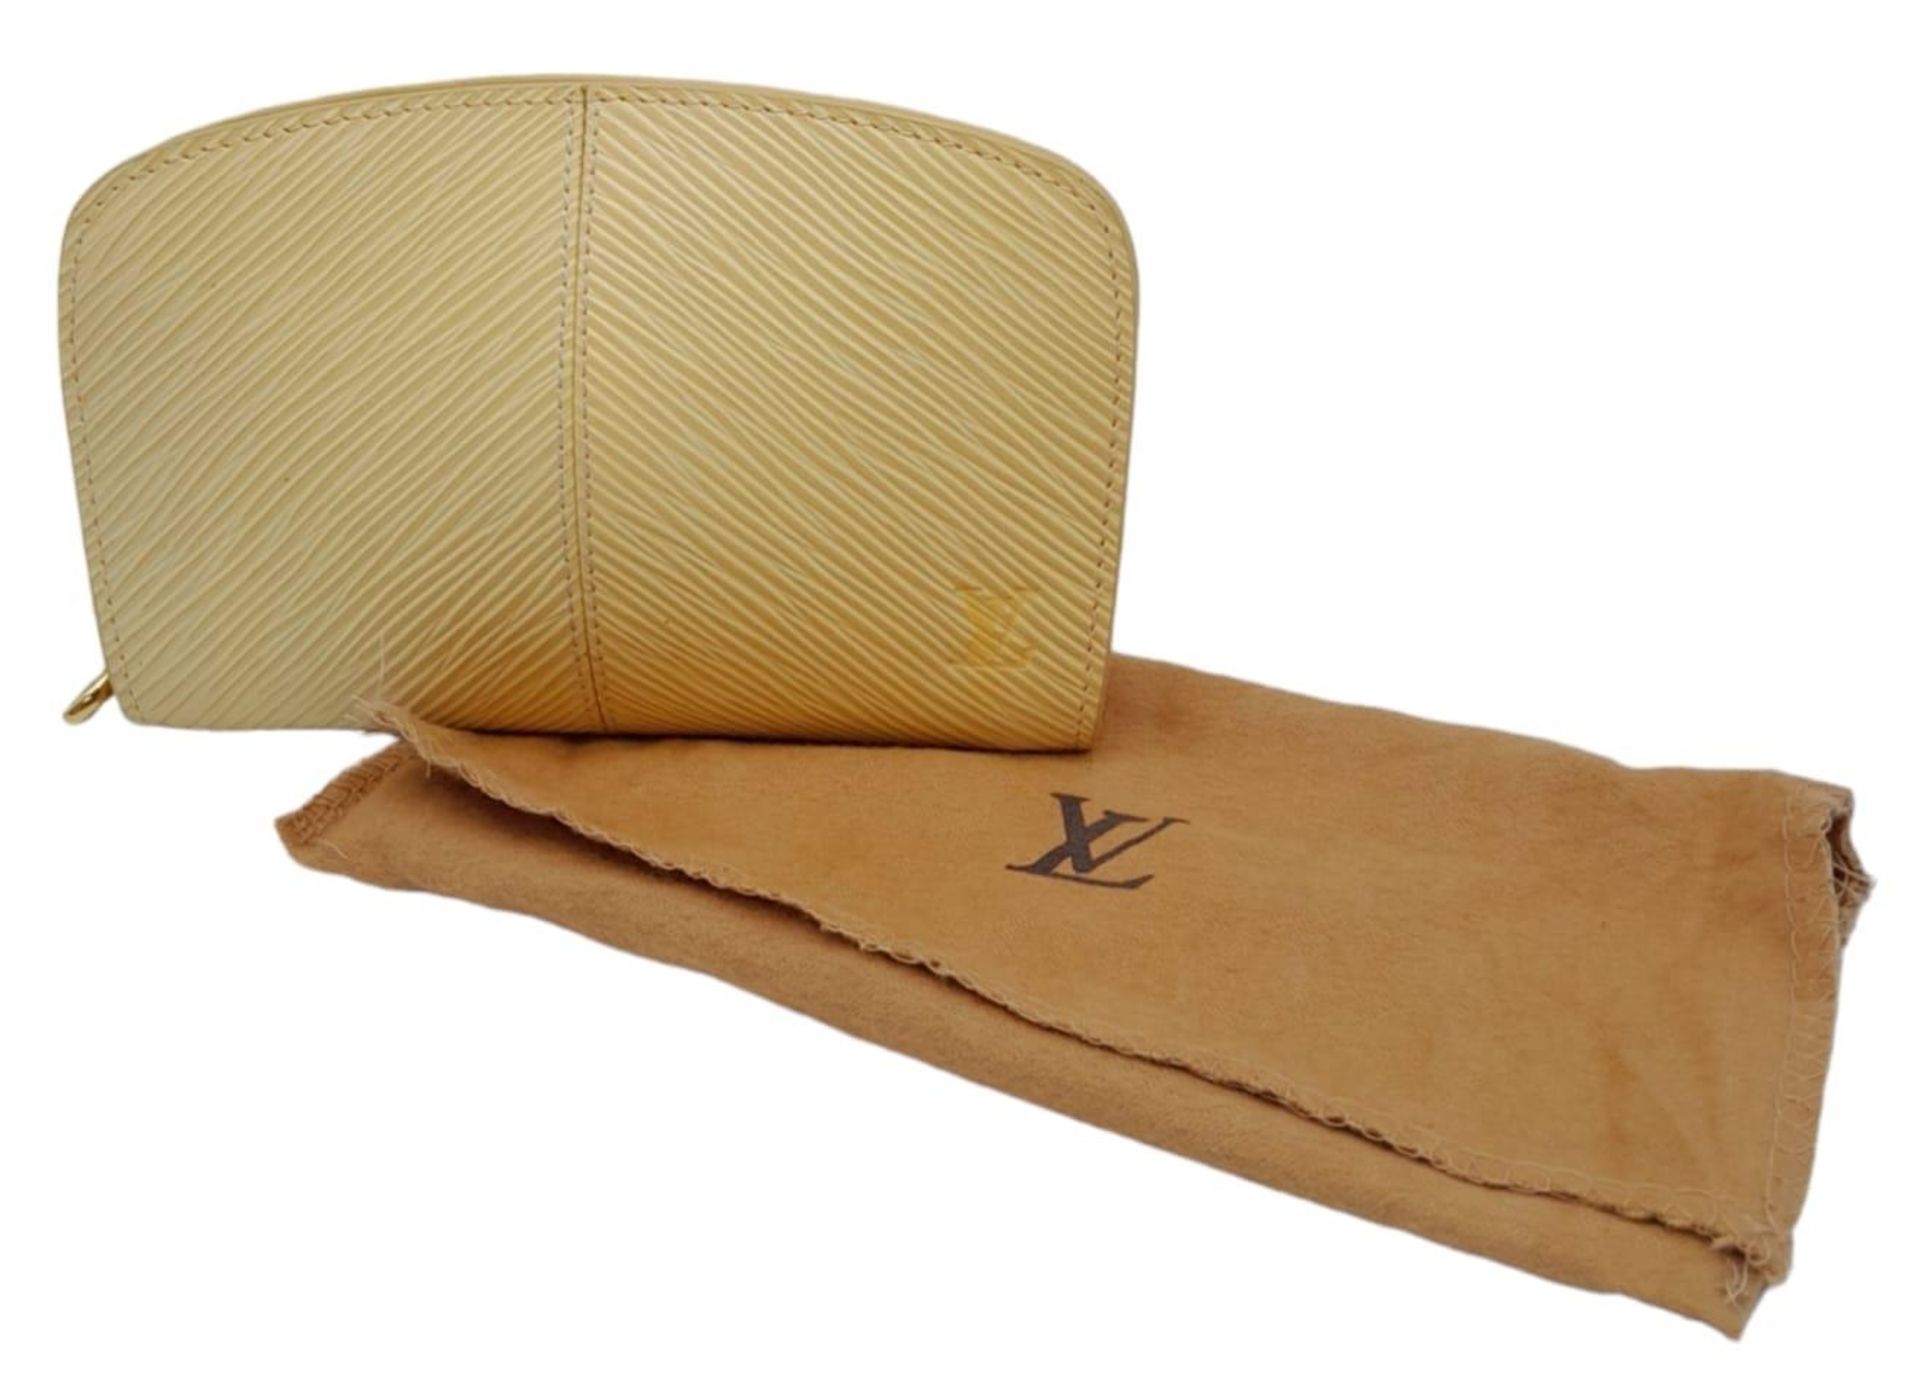 A Louis Vuitton Vanilla Wallet. Epi leather exterior gold-toned hardware and zipped top closure. - Image 2 of 9